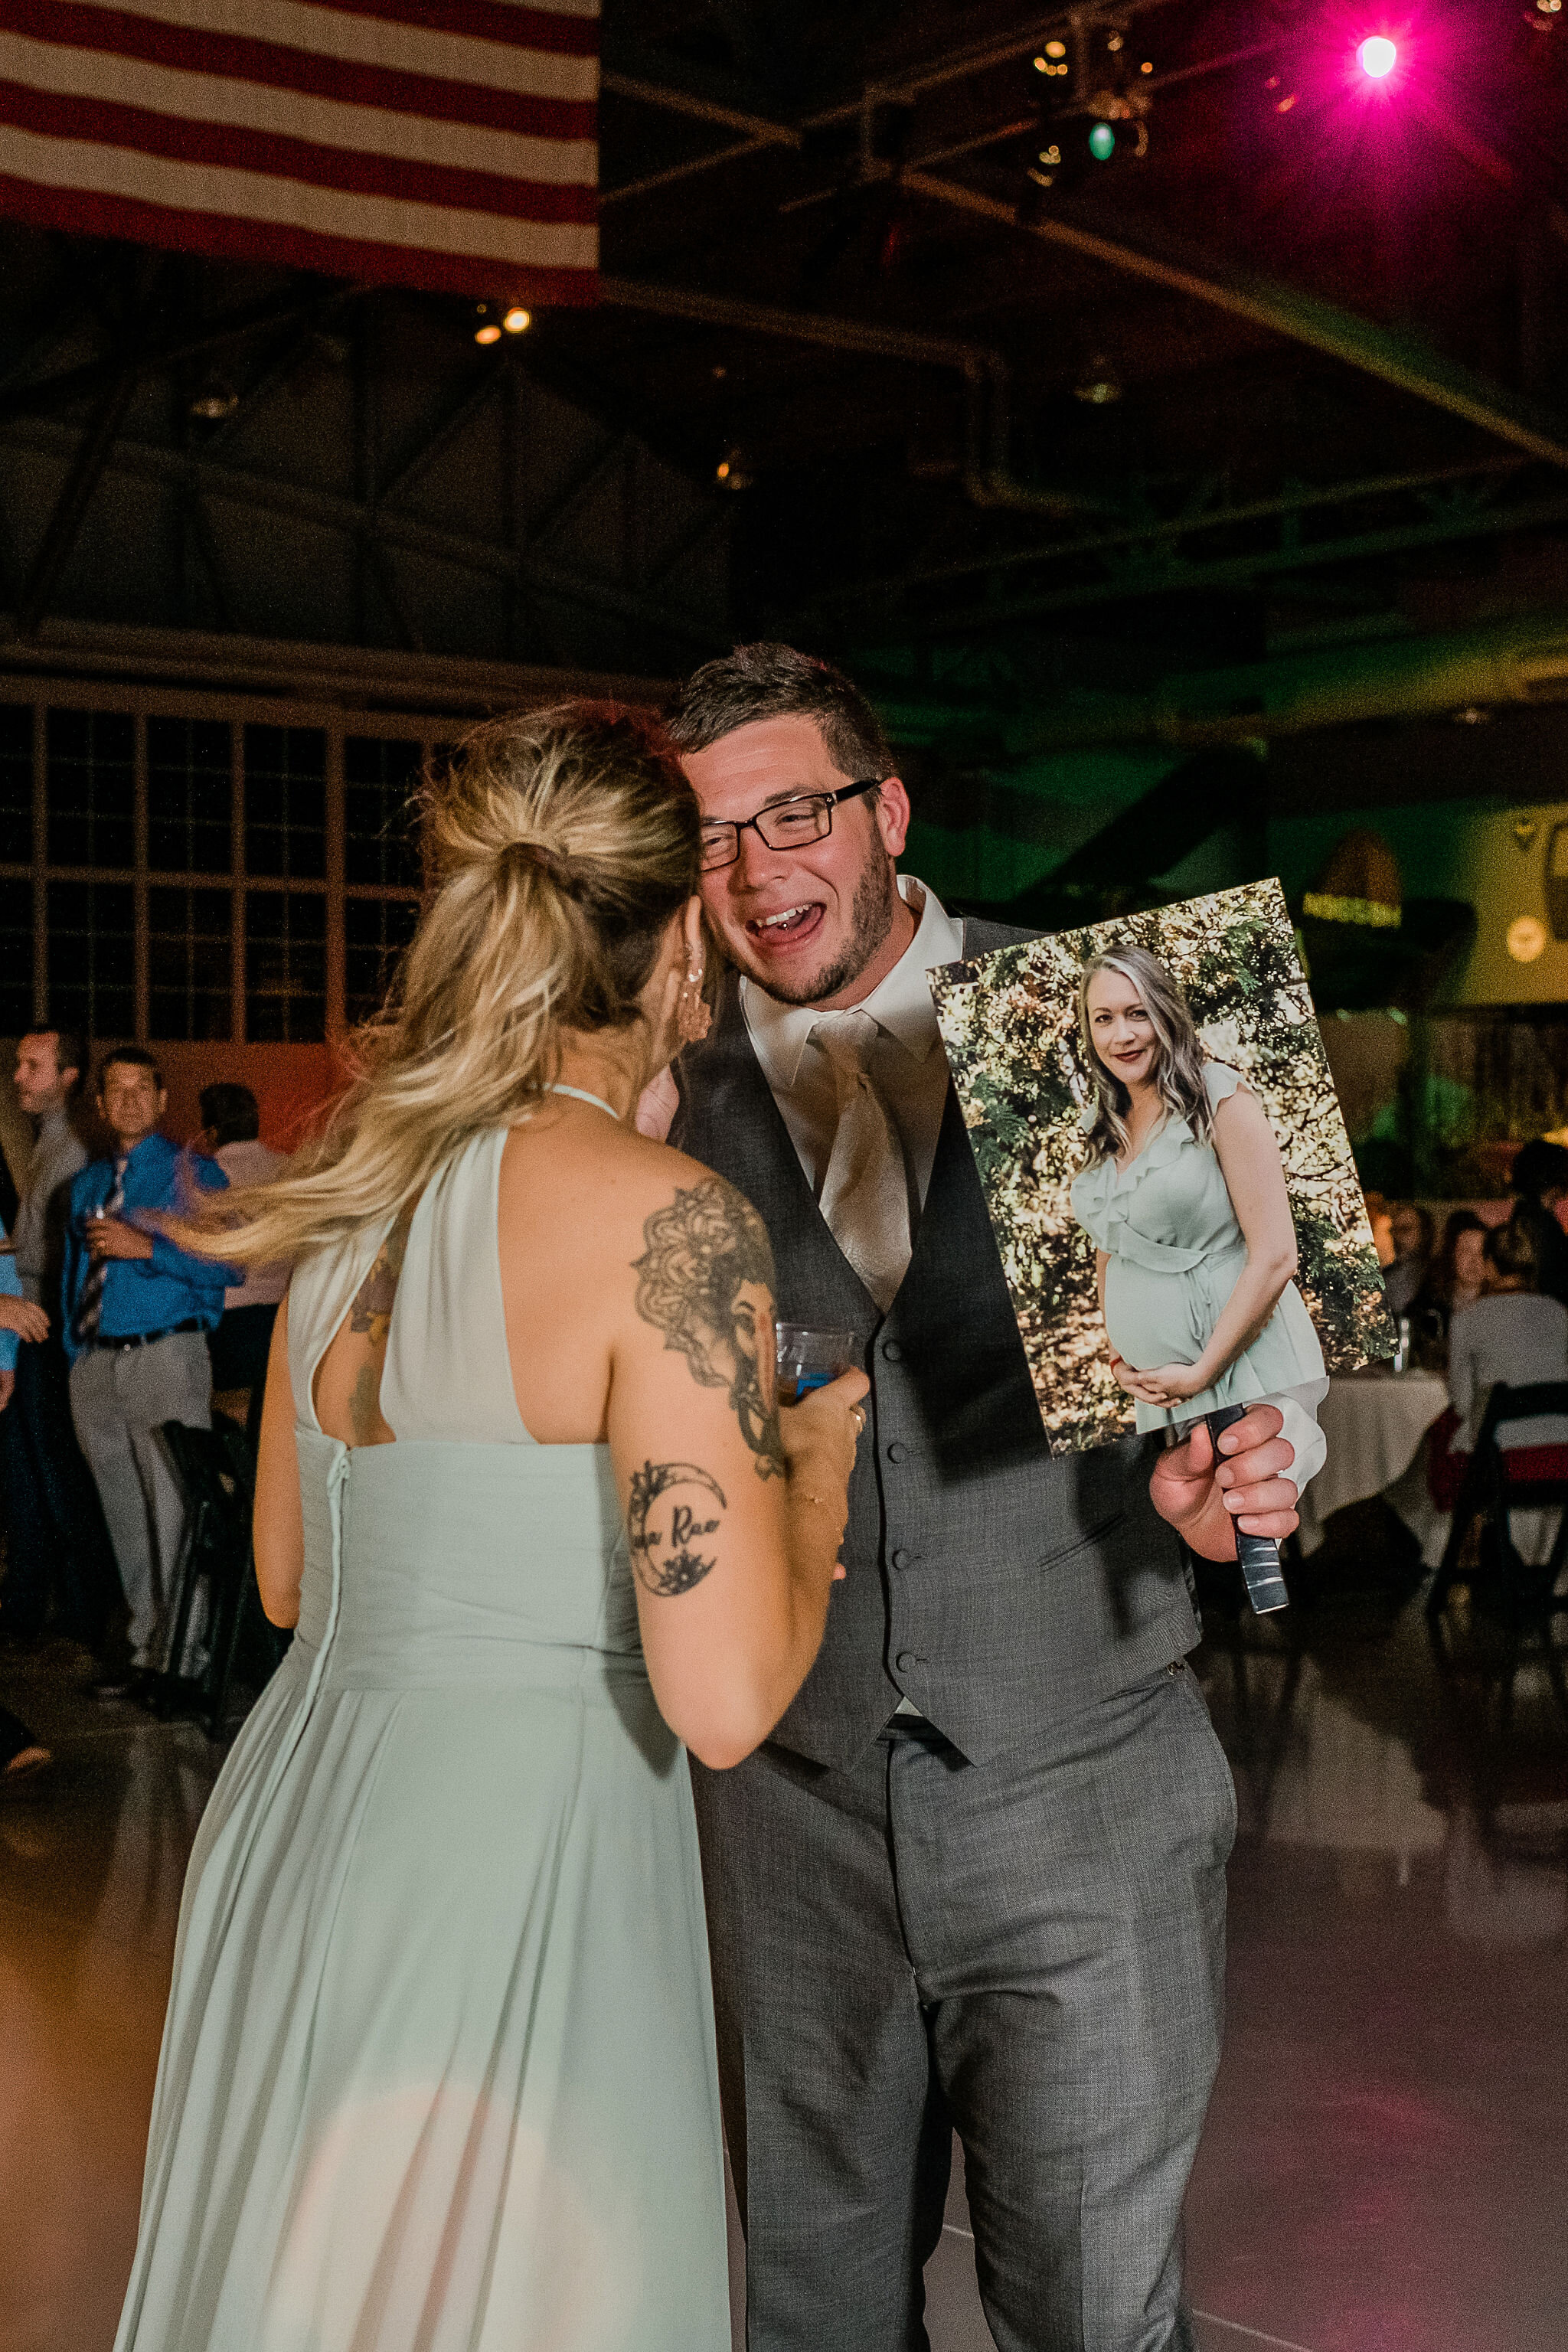 Wedding guests dancing with a photo of someone